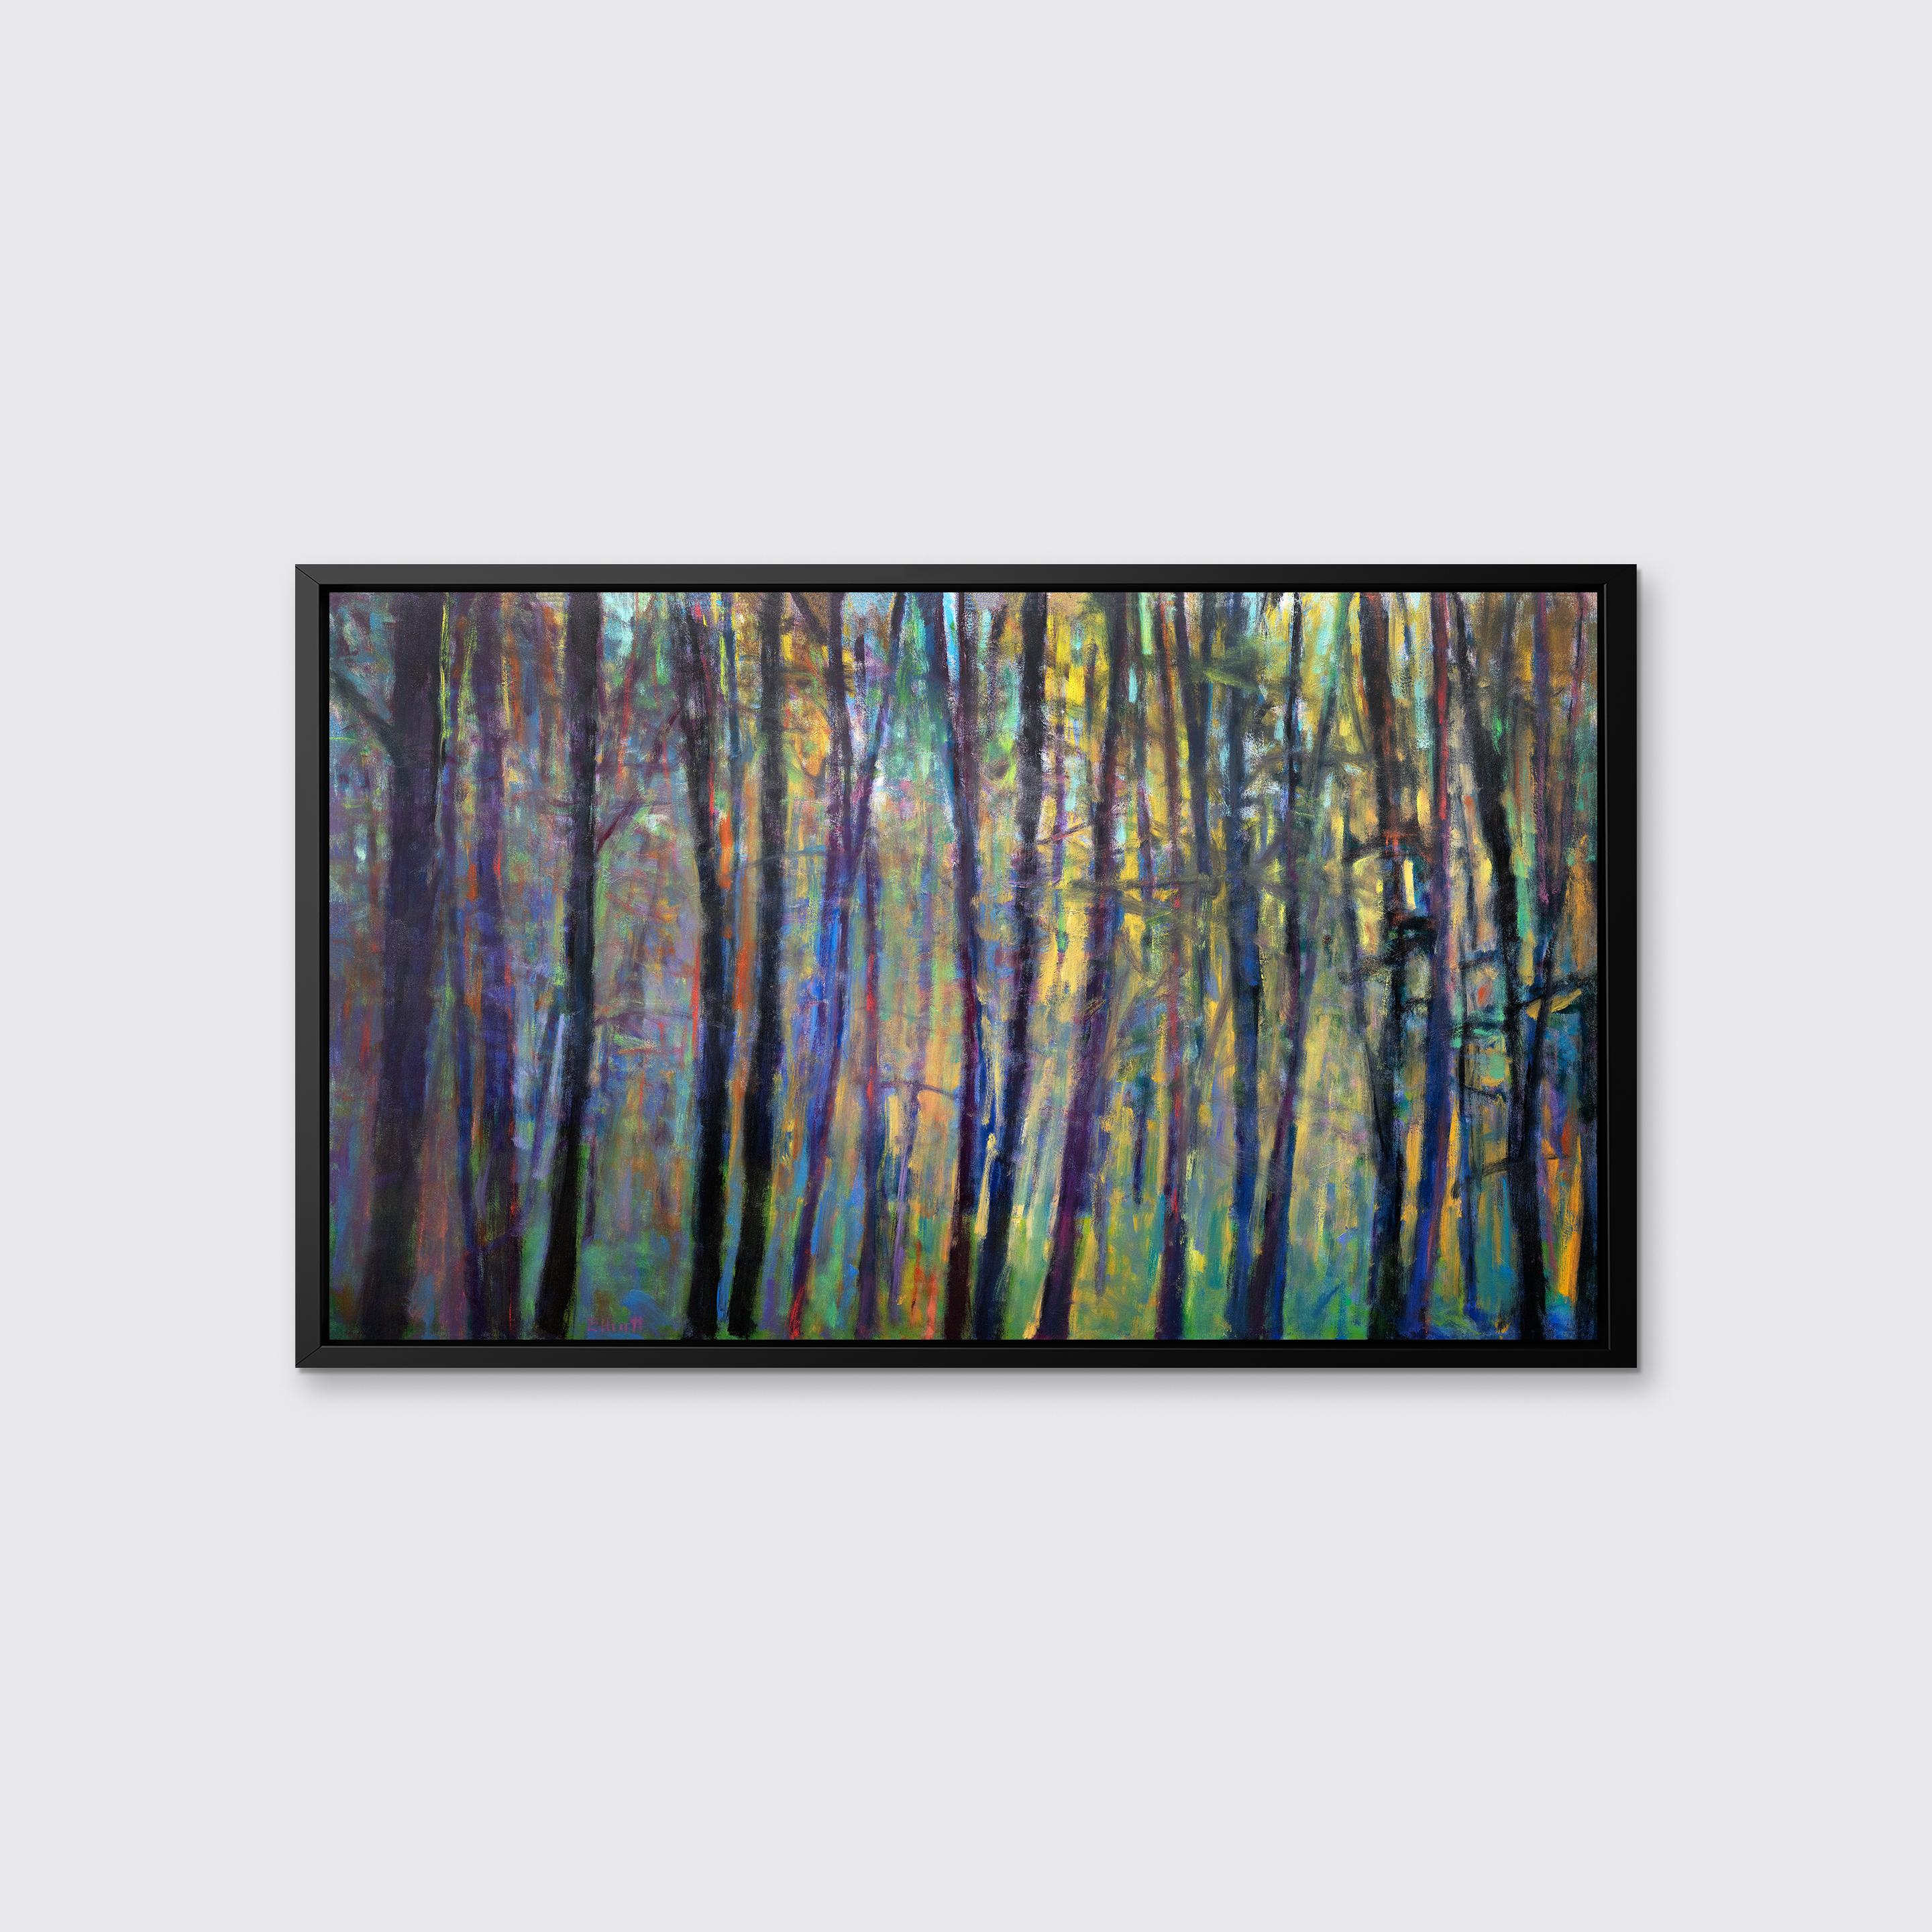 This contemporary abstract landscape limited edition print by Ken Elliott features multi-colored tree trunks and foliage extend from the bottom of the canvas up to the top, with a range of color combining in energized strokes to create the feeling